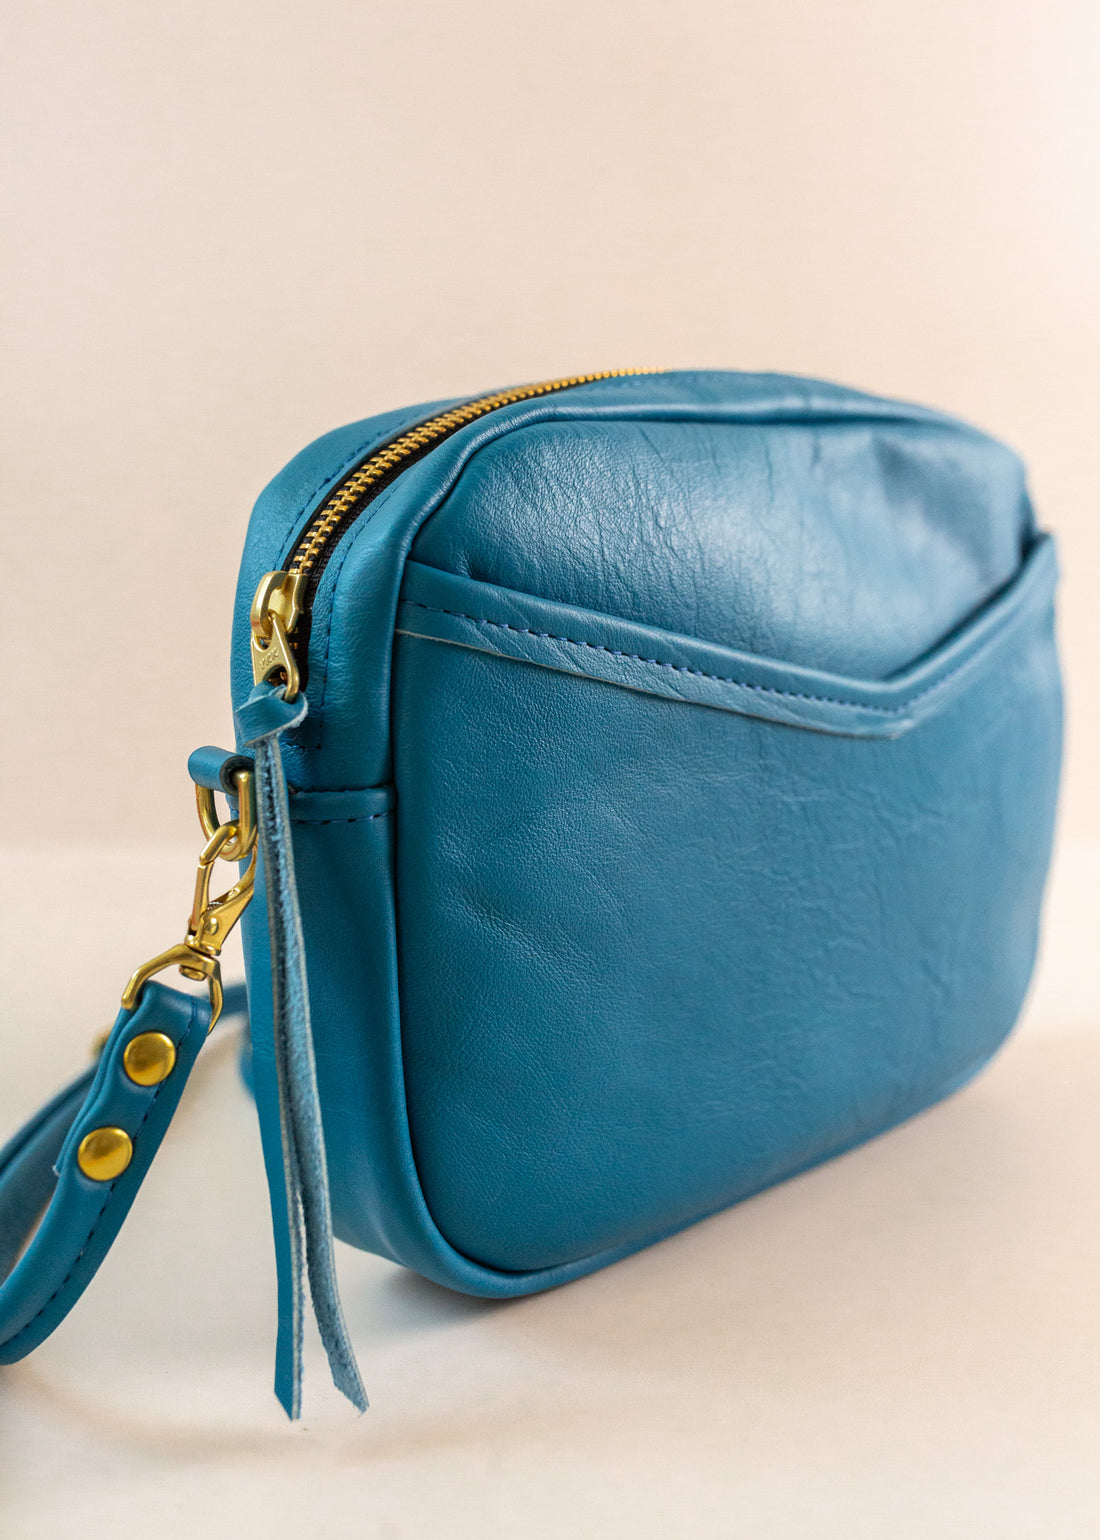 Close-up of cubist handbag in azure, with a v-shaped front pocket and a long thin shoulder strap